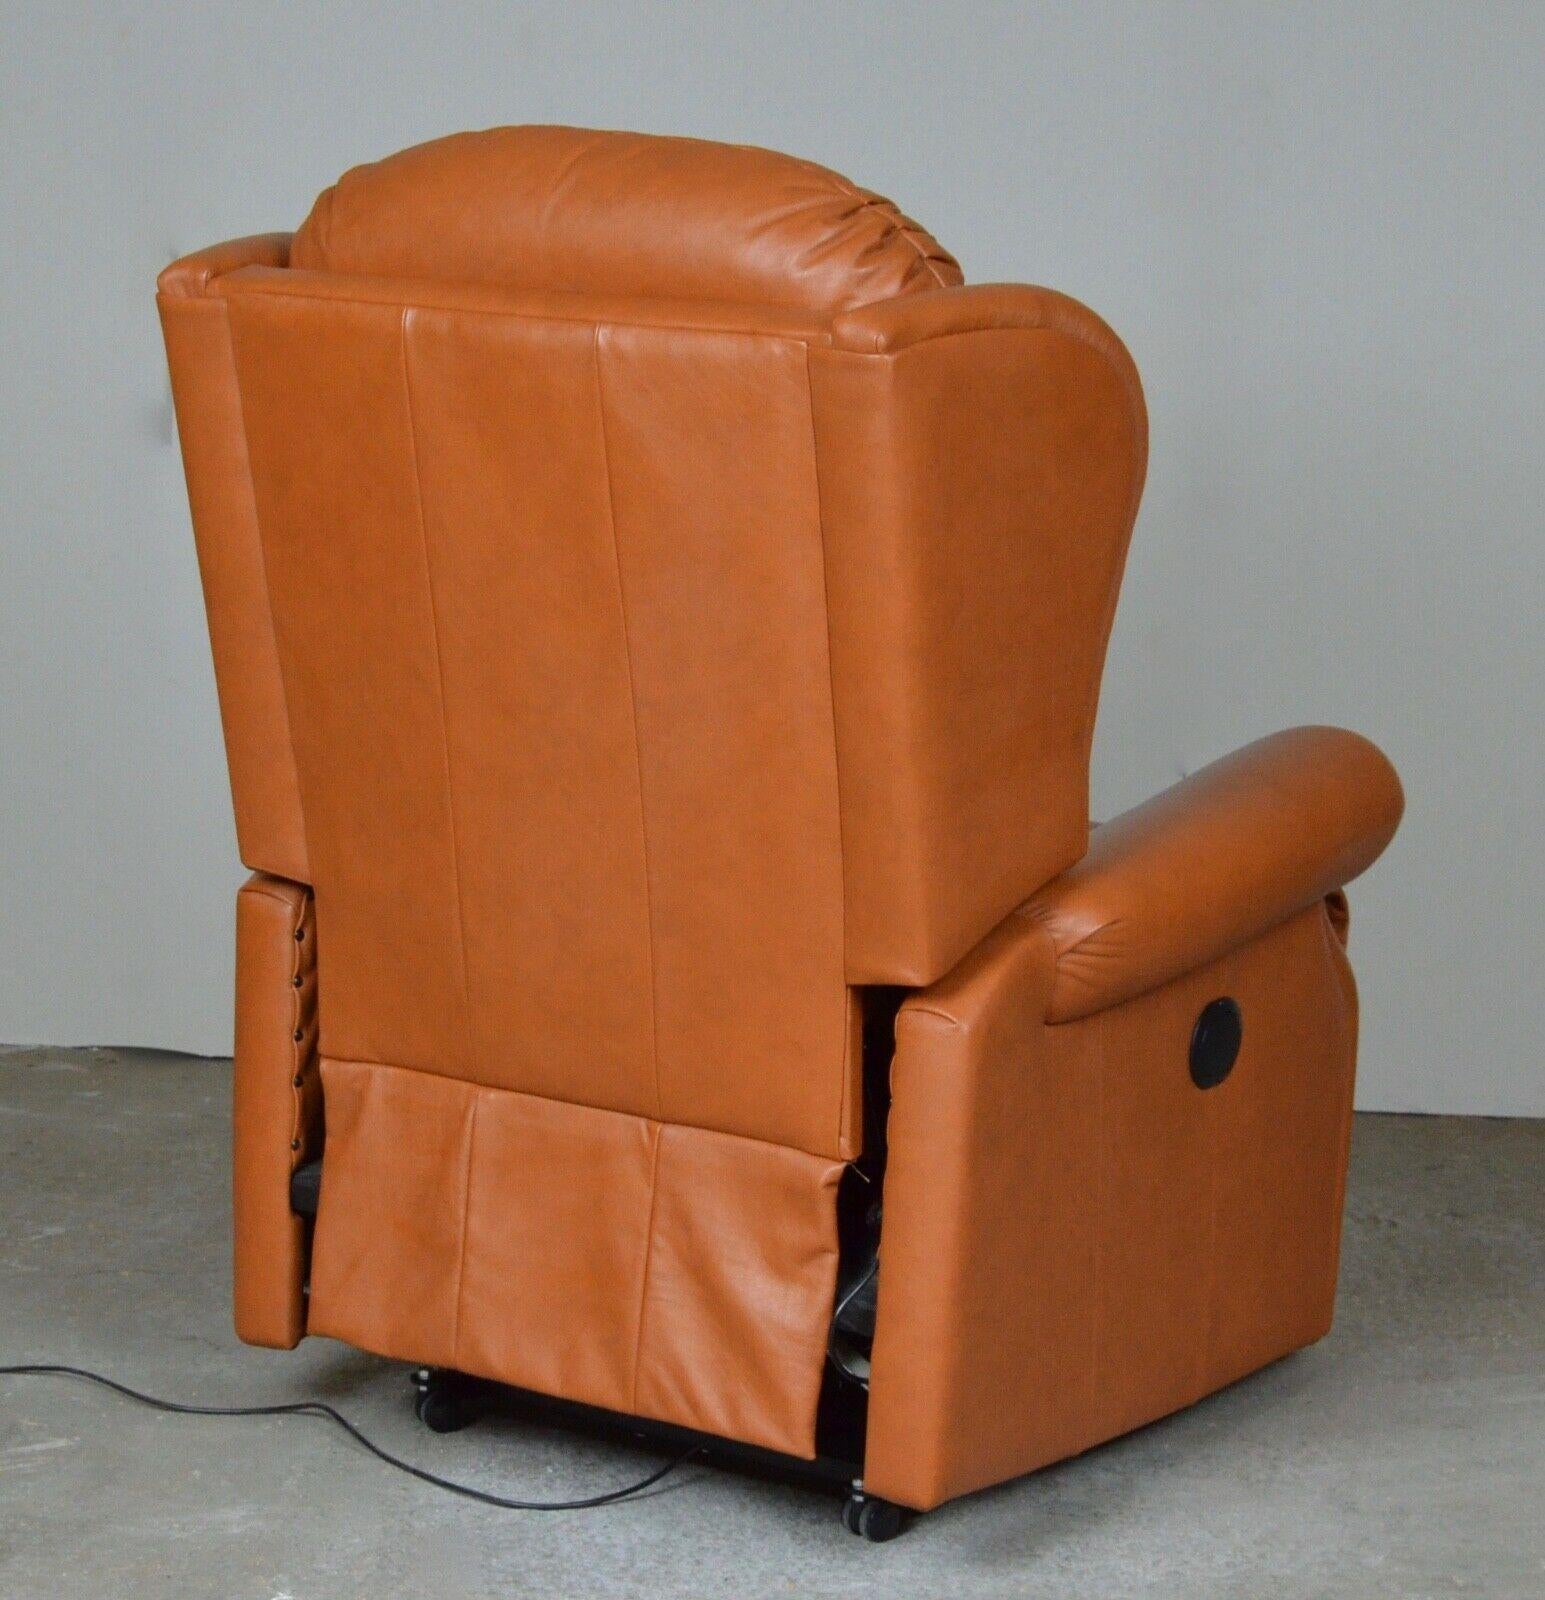 Hand-Crafted 1 of 2 Tan Leather Electric Recliner Armchairs